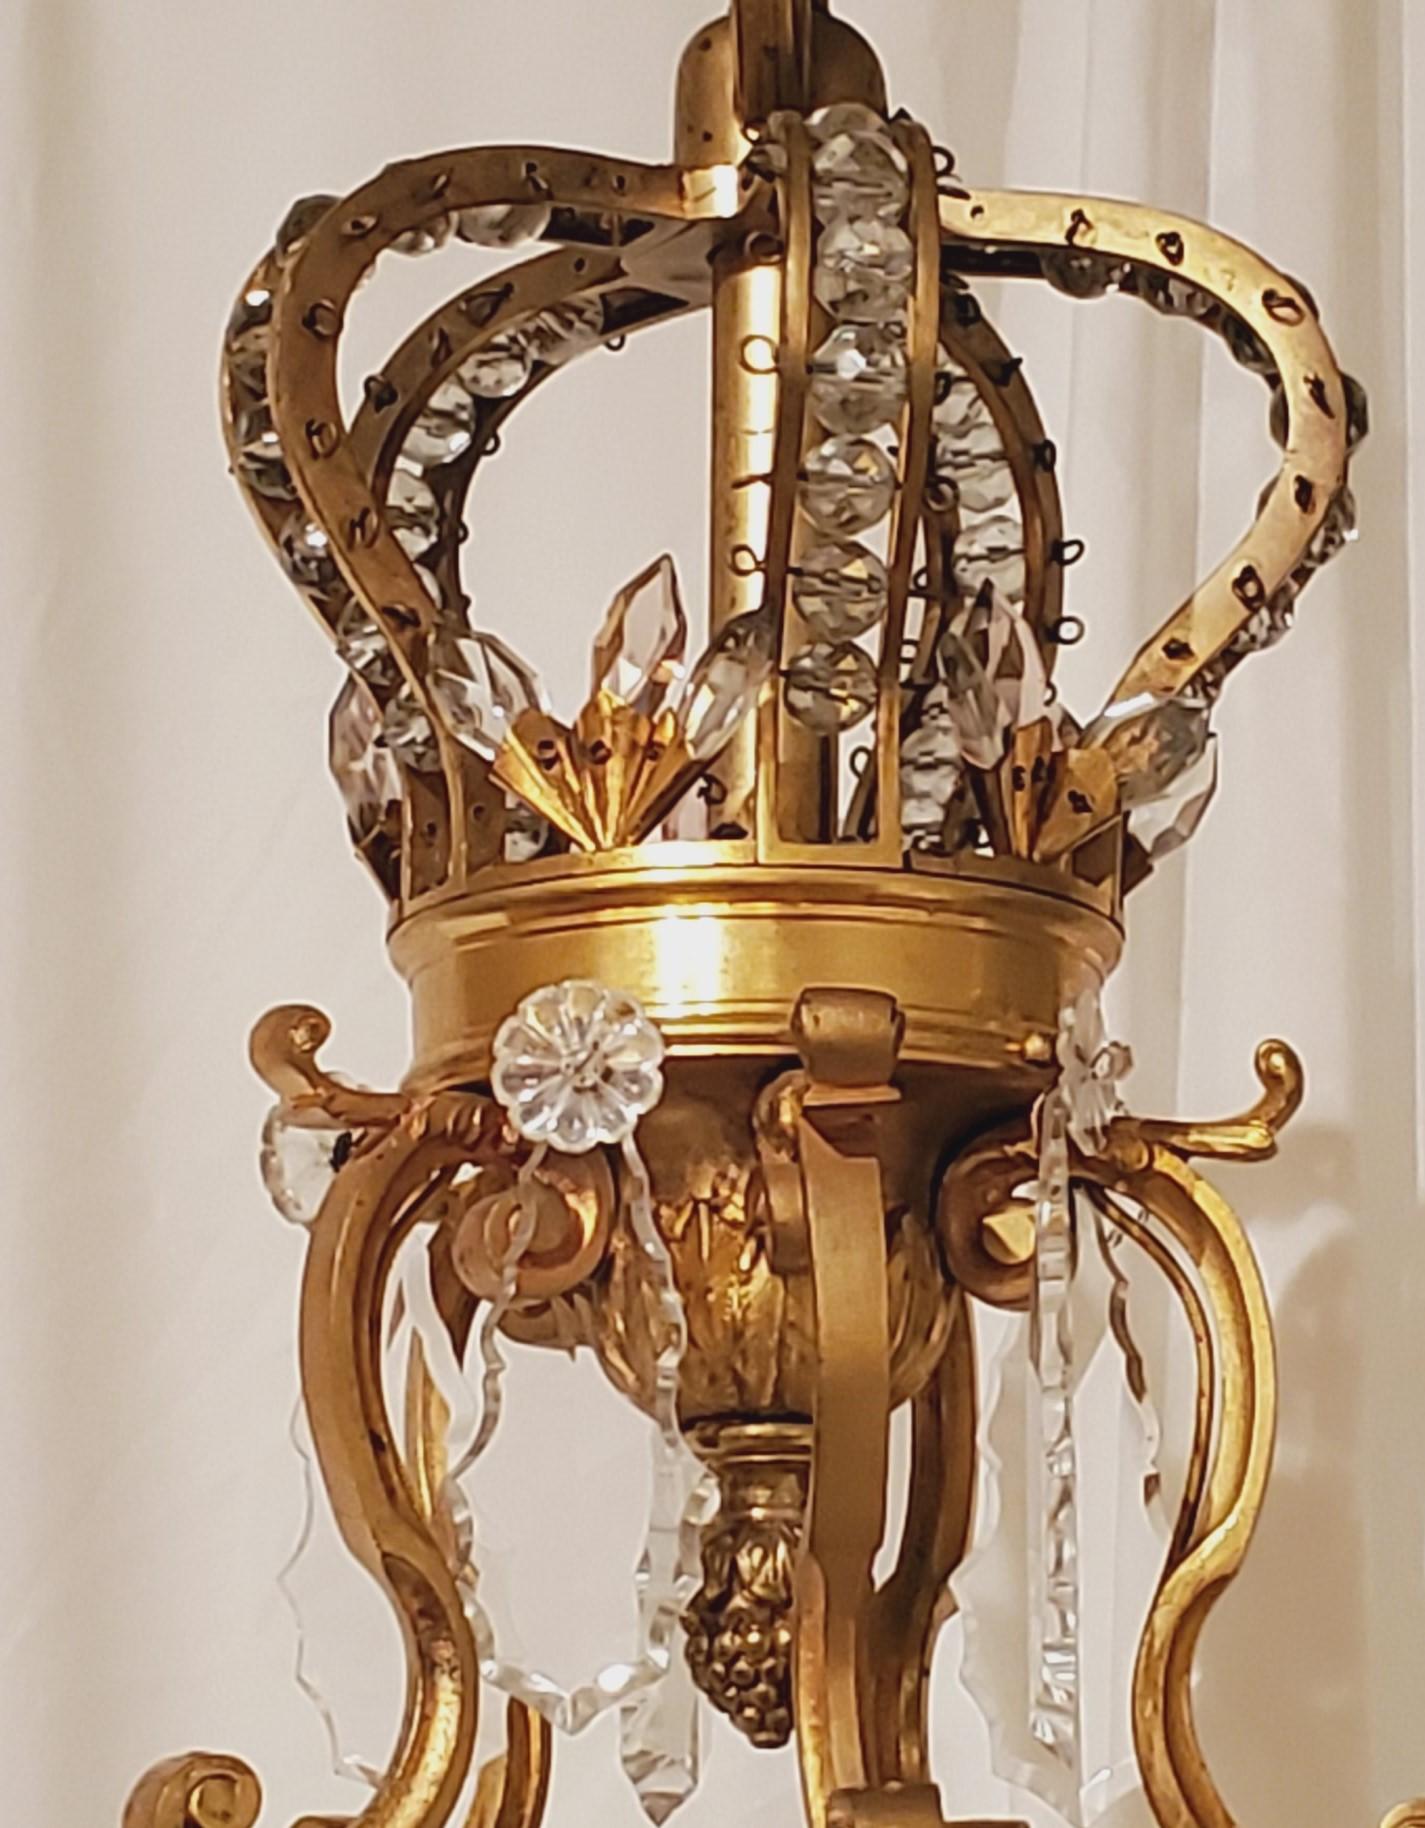 This chandelier has a charming crown atop.